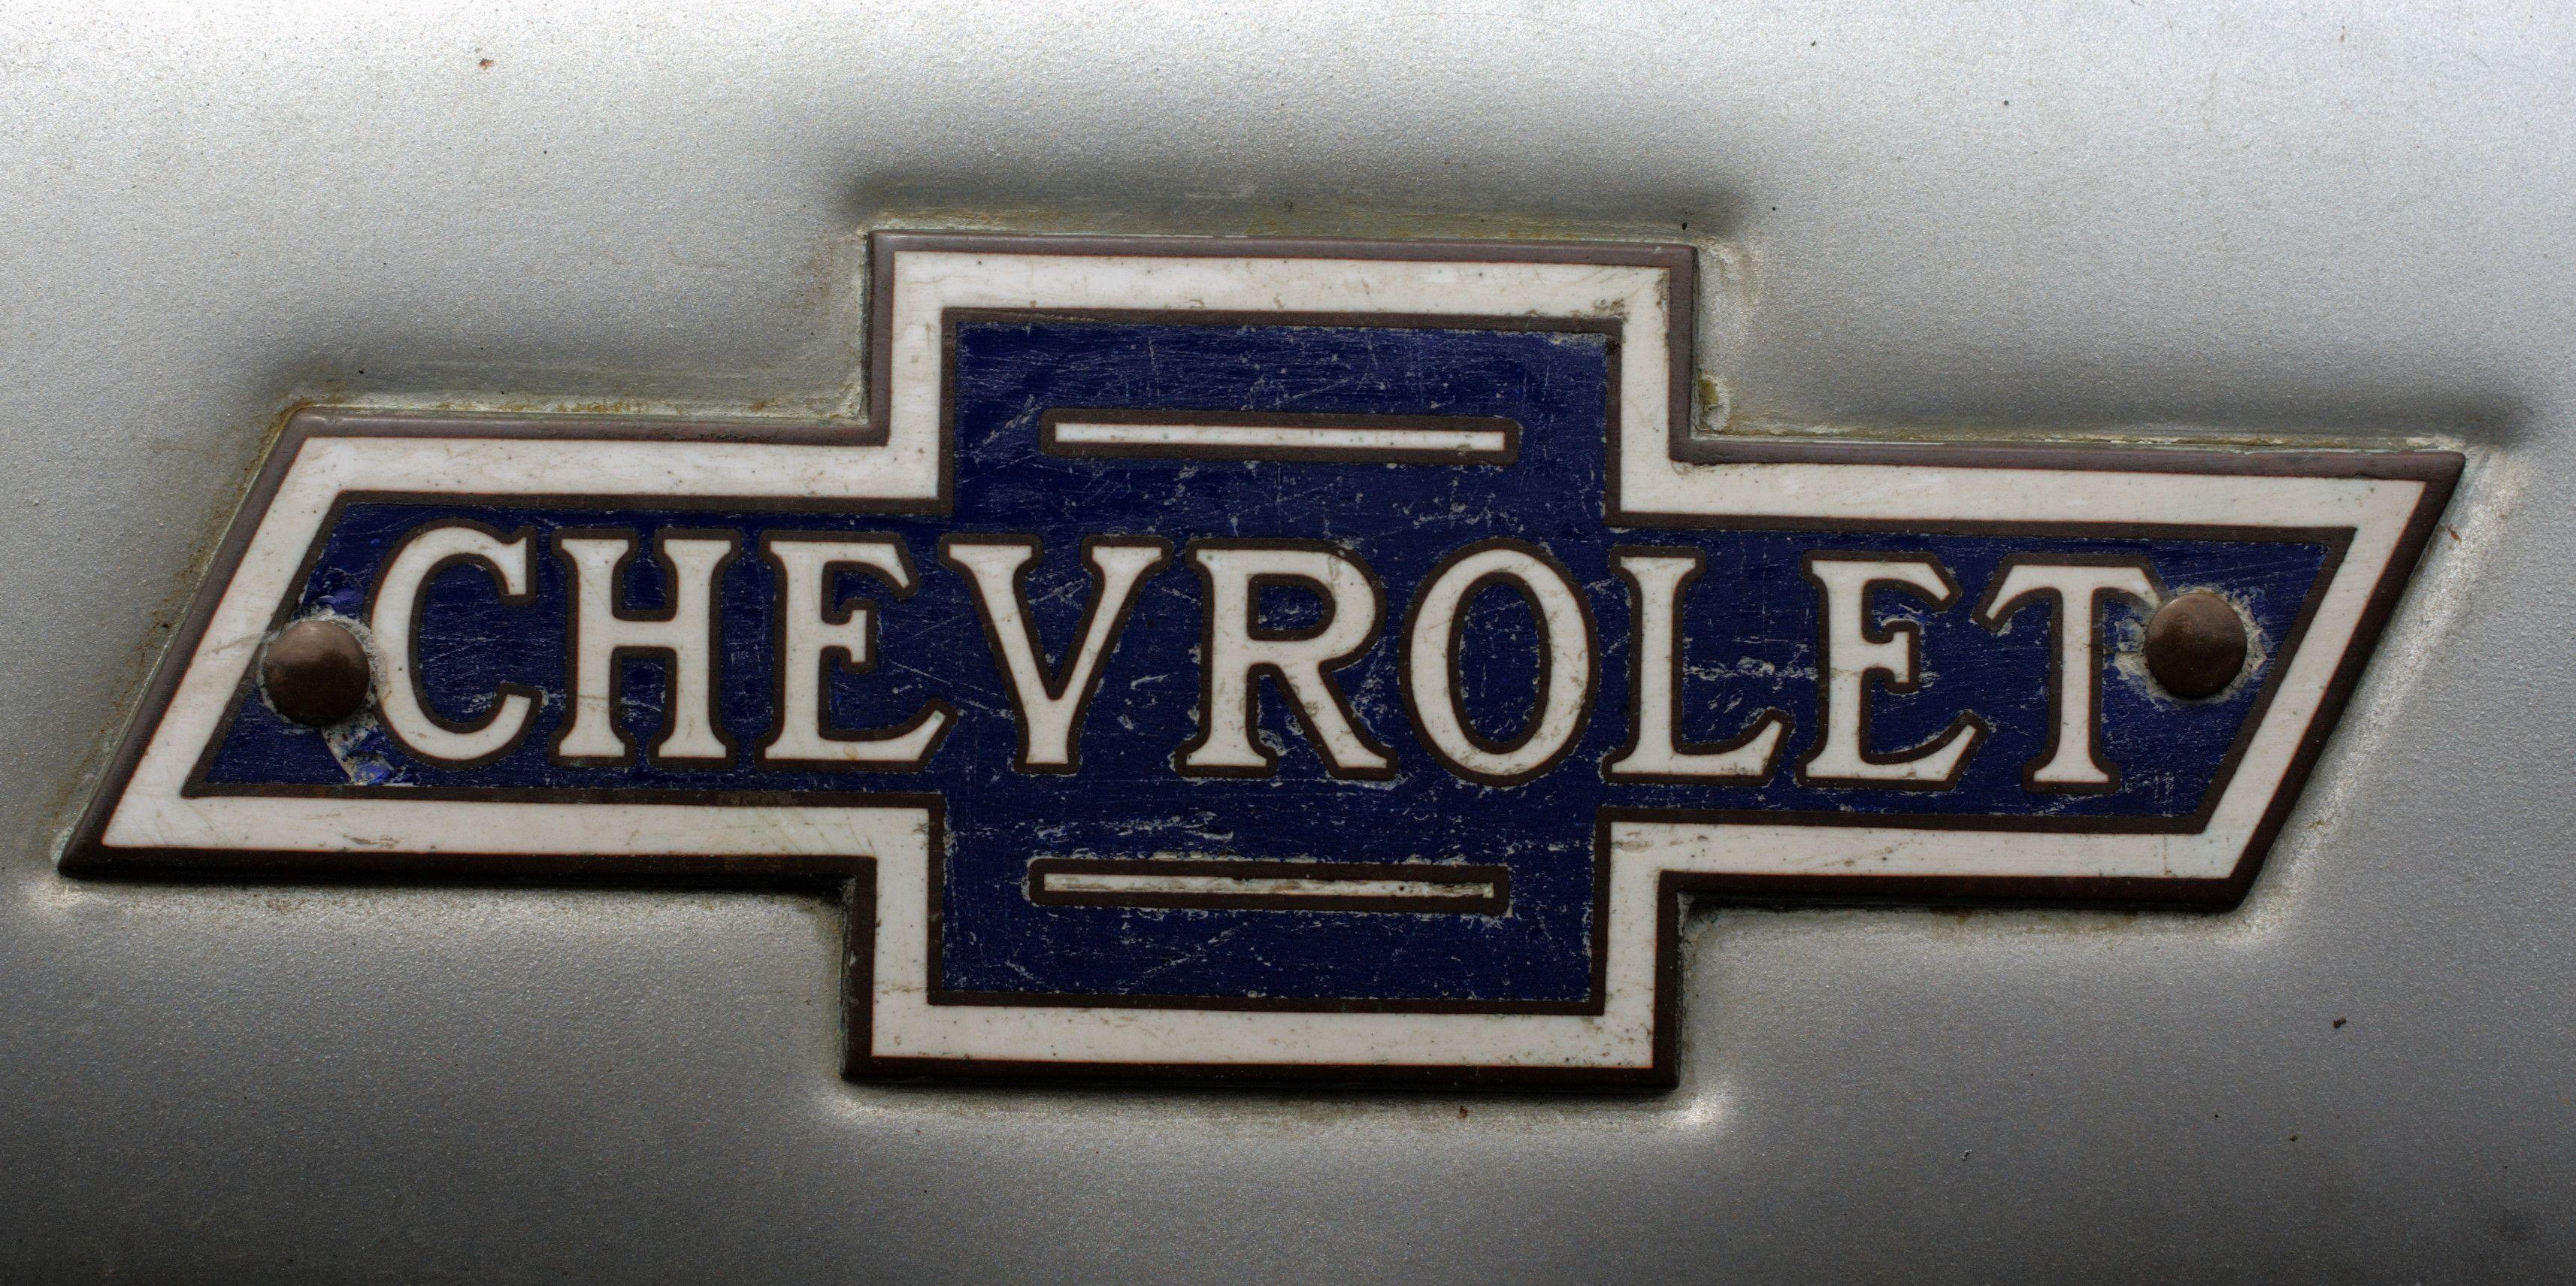 Old Chevrolet Car Logo - Chevy Logo, Chevrolet Car Symbol Meaning and History | Car Brand ...